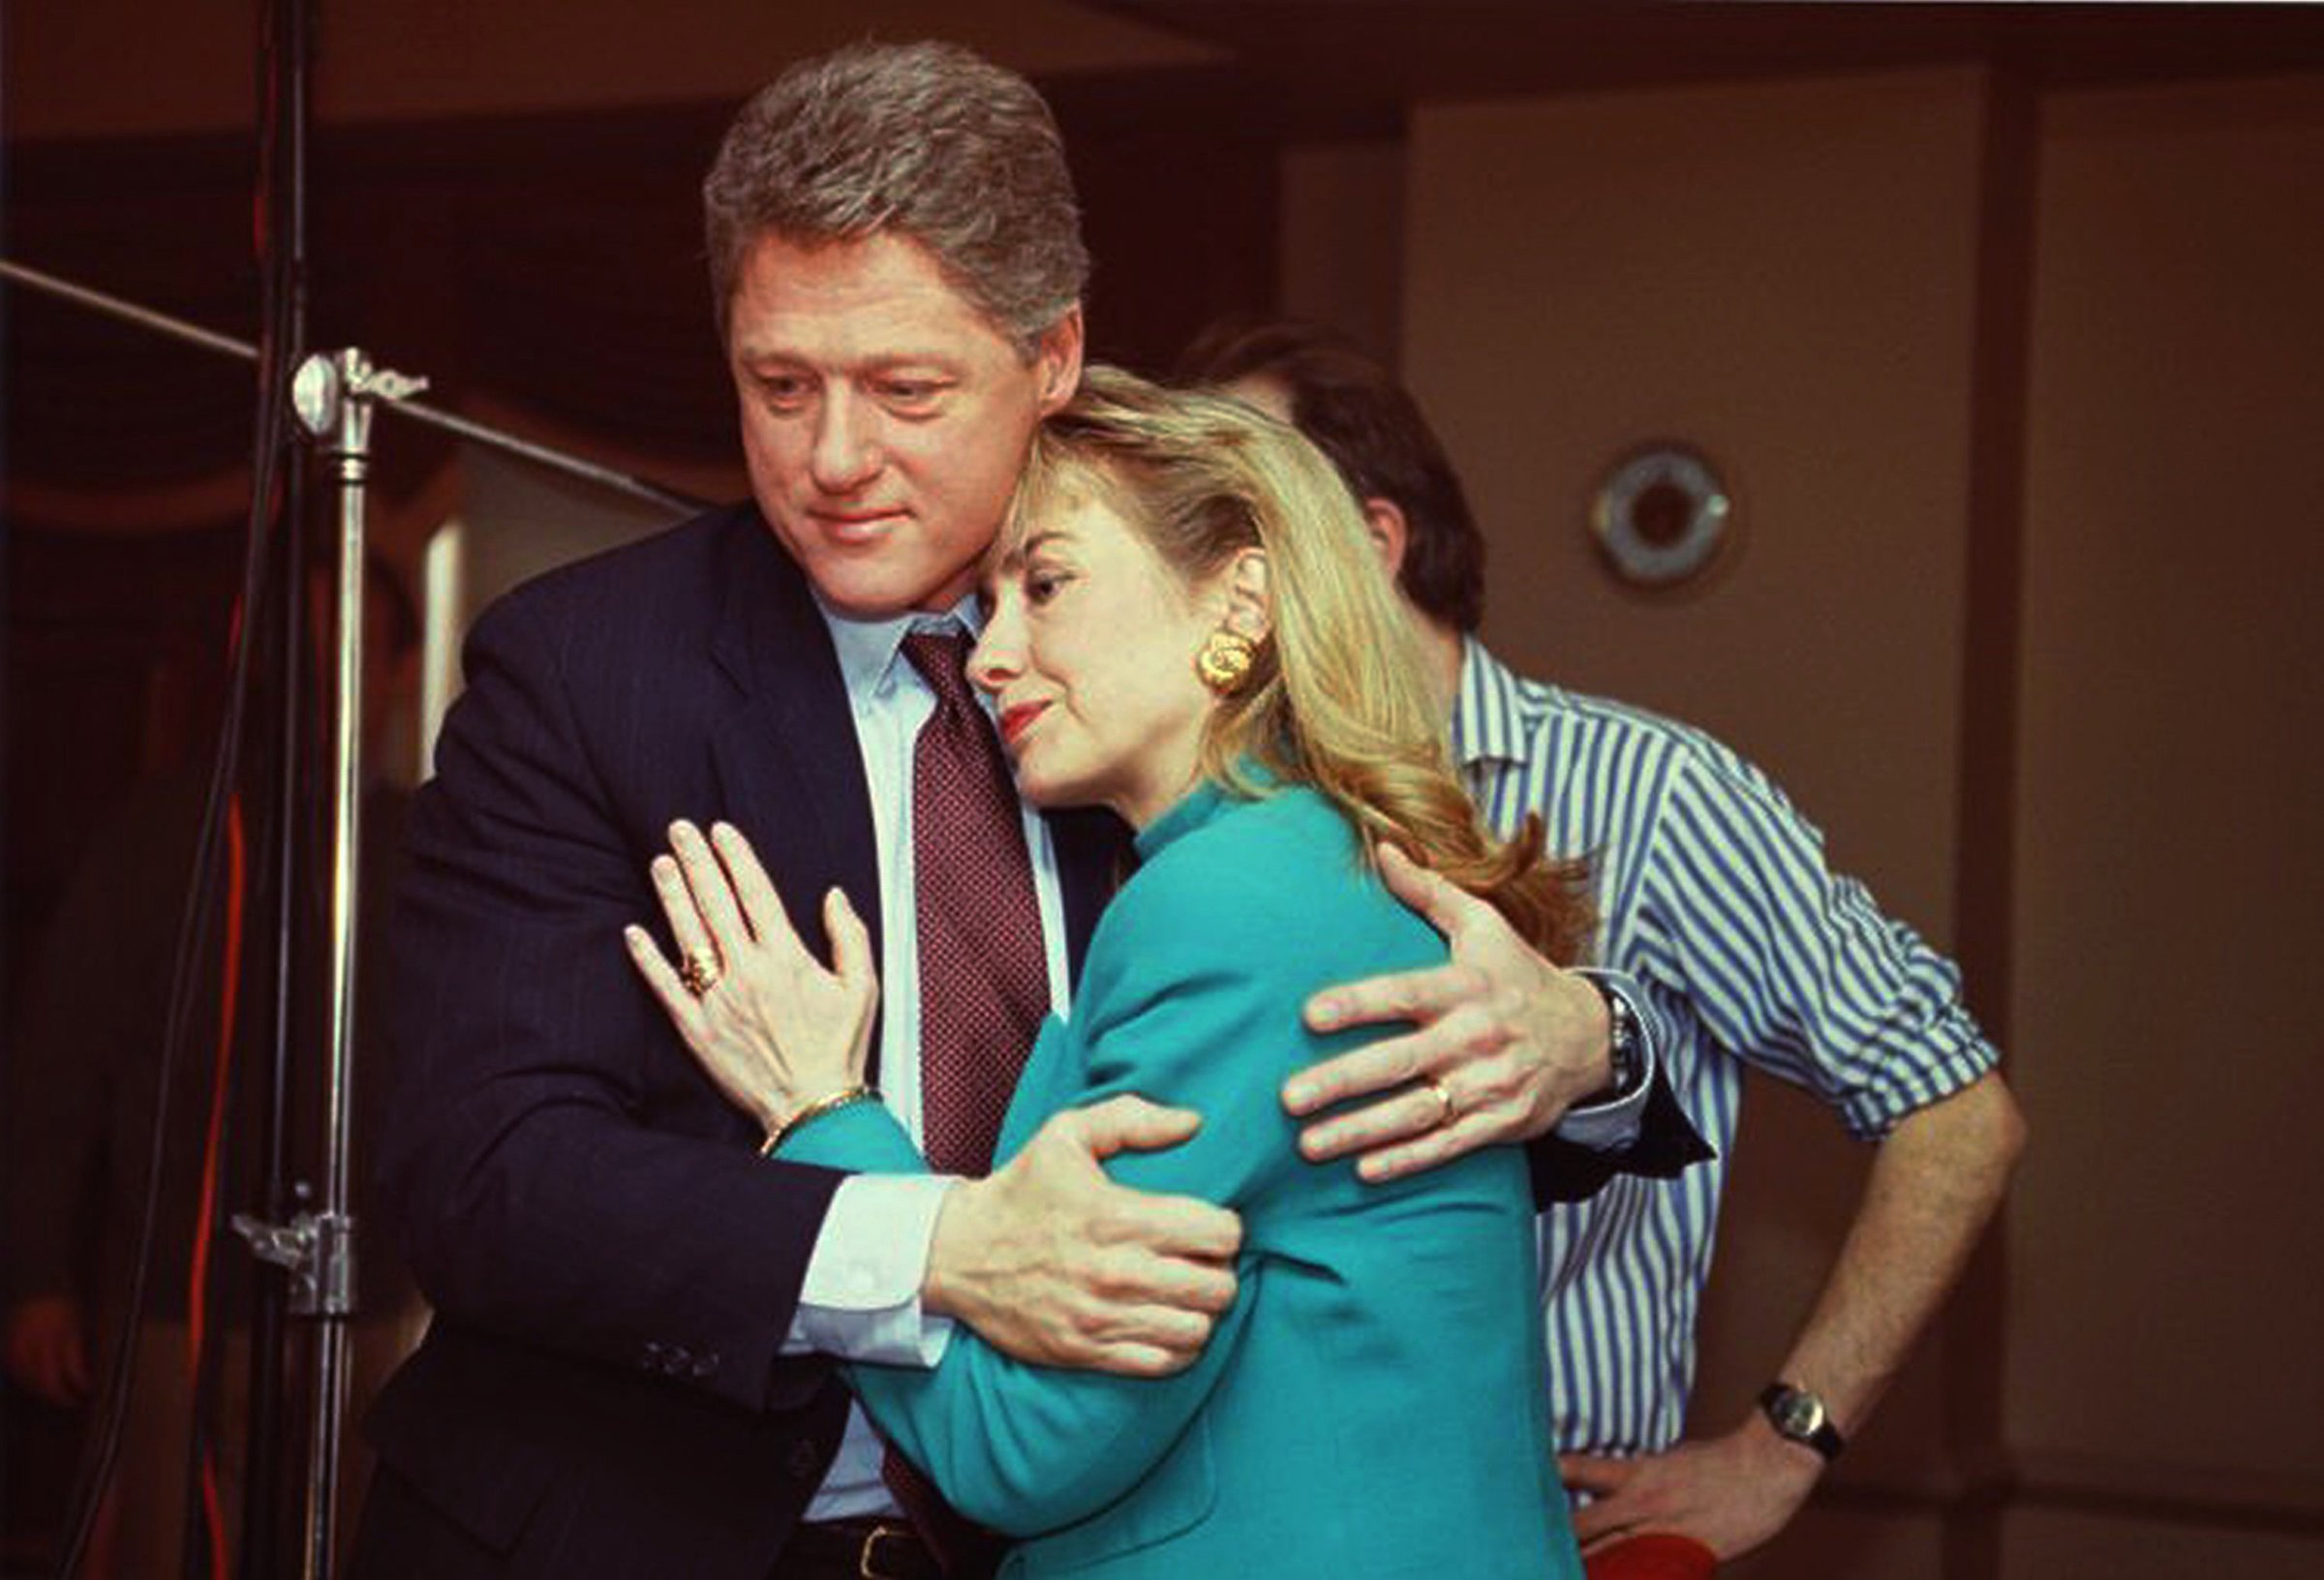 The past conduct of Bill Clinton (above, in 1992 during the 60 Minutes shoot, comforting Hillary after a stage light fell nearby) may haunt his wife’s campaign